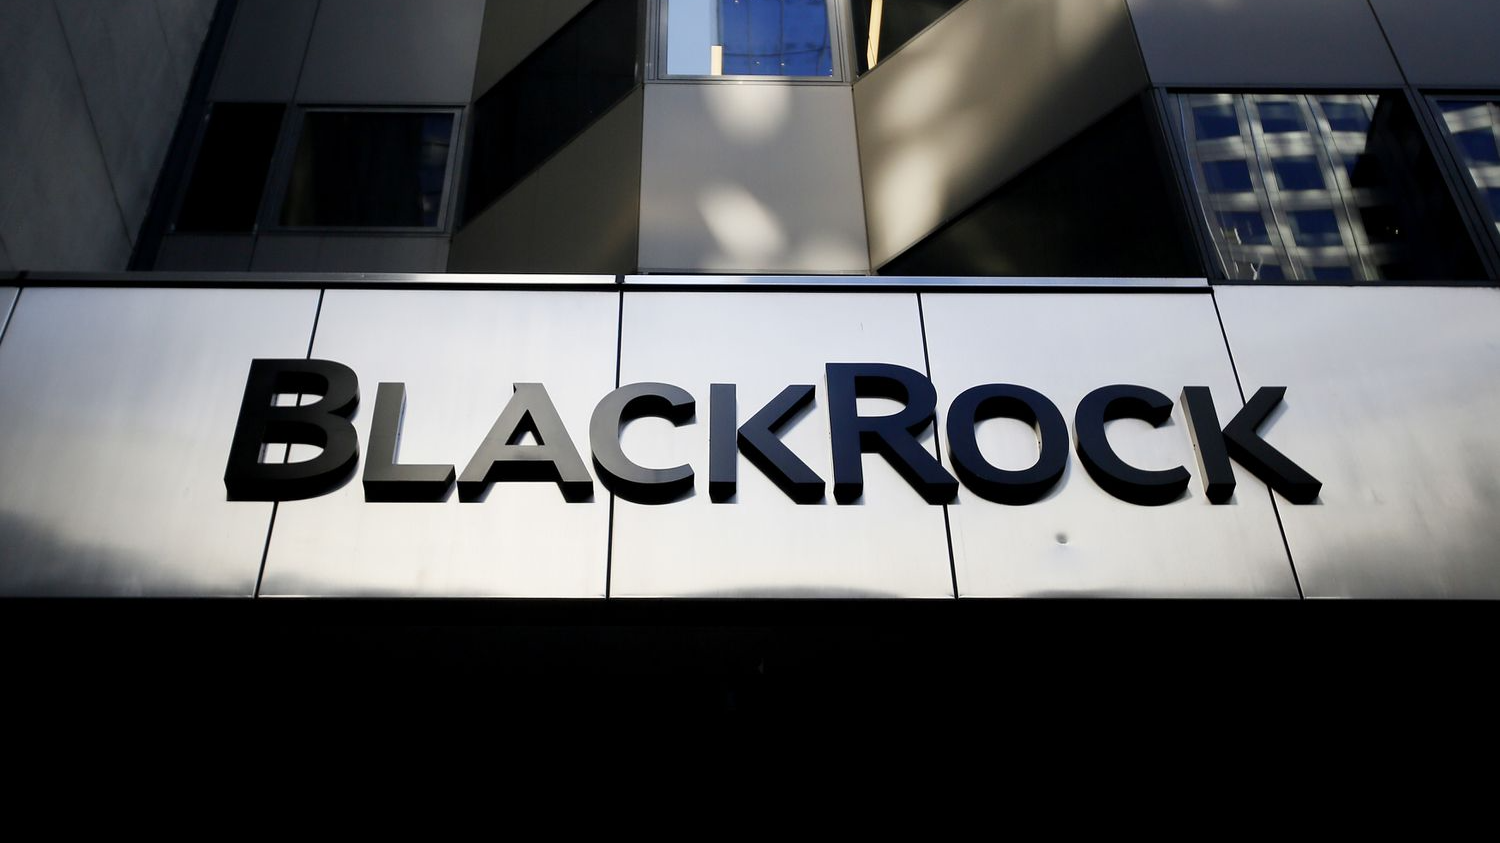 BlackRock Bitcoin ETF Liquidity Will Be Backed By Industry Giants